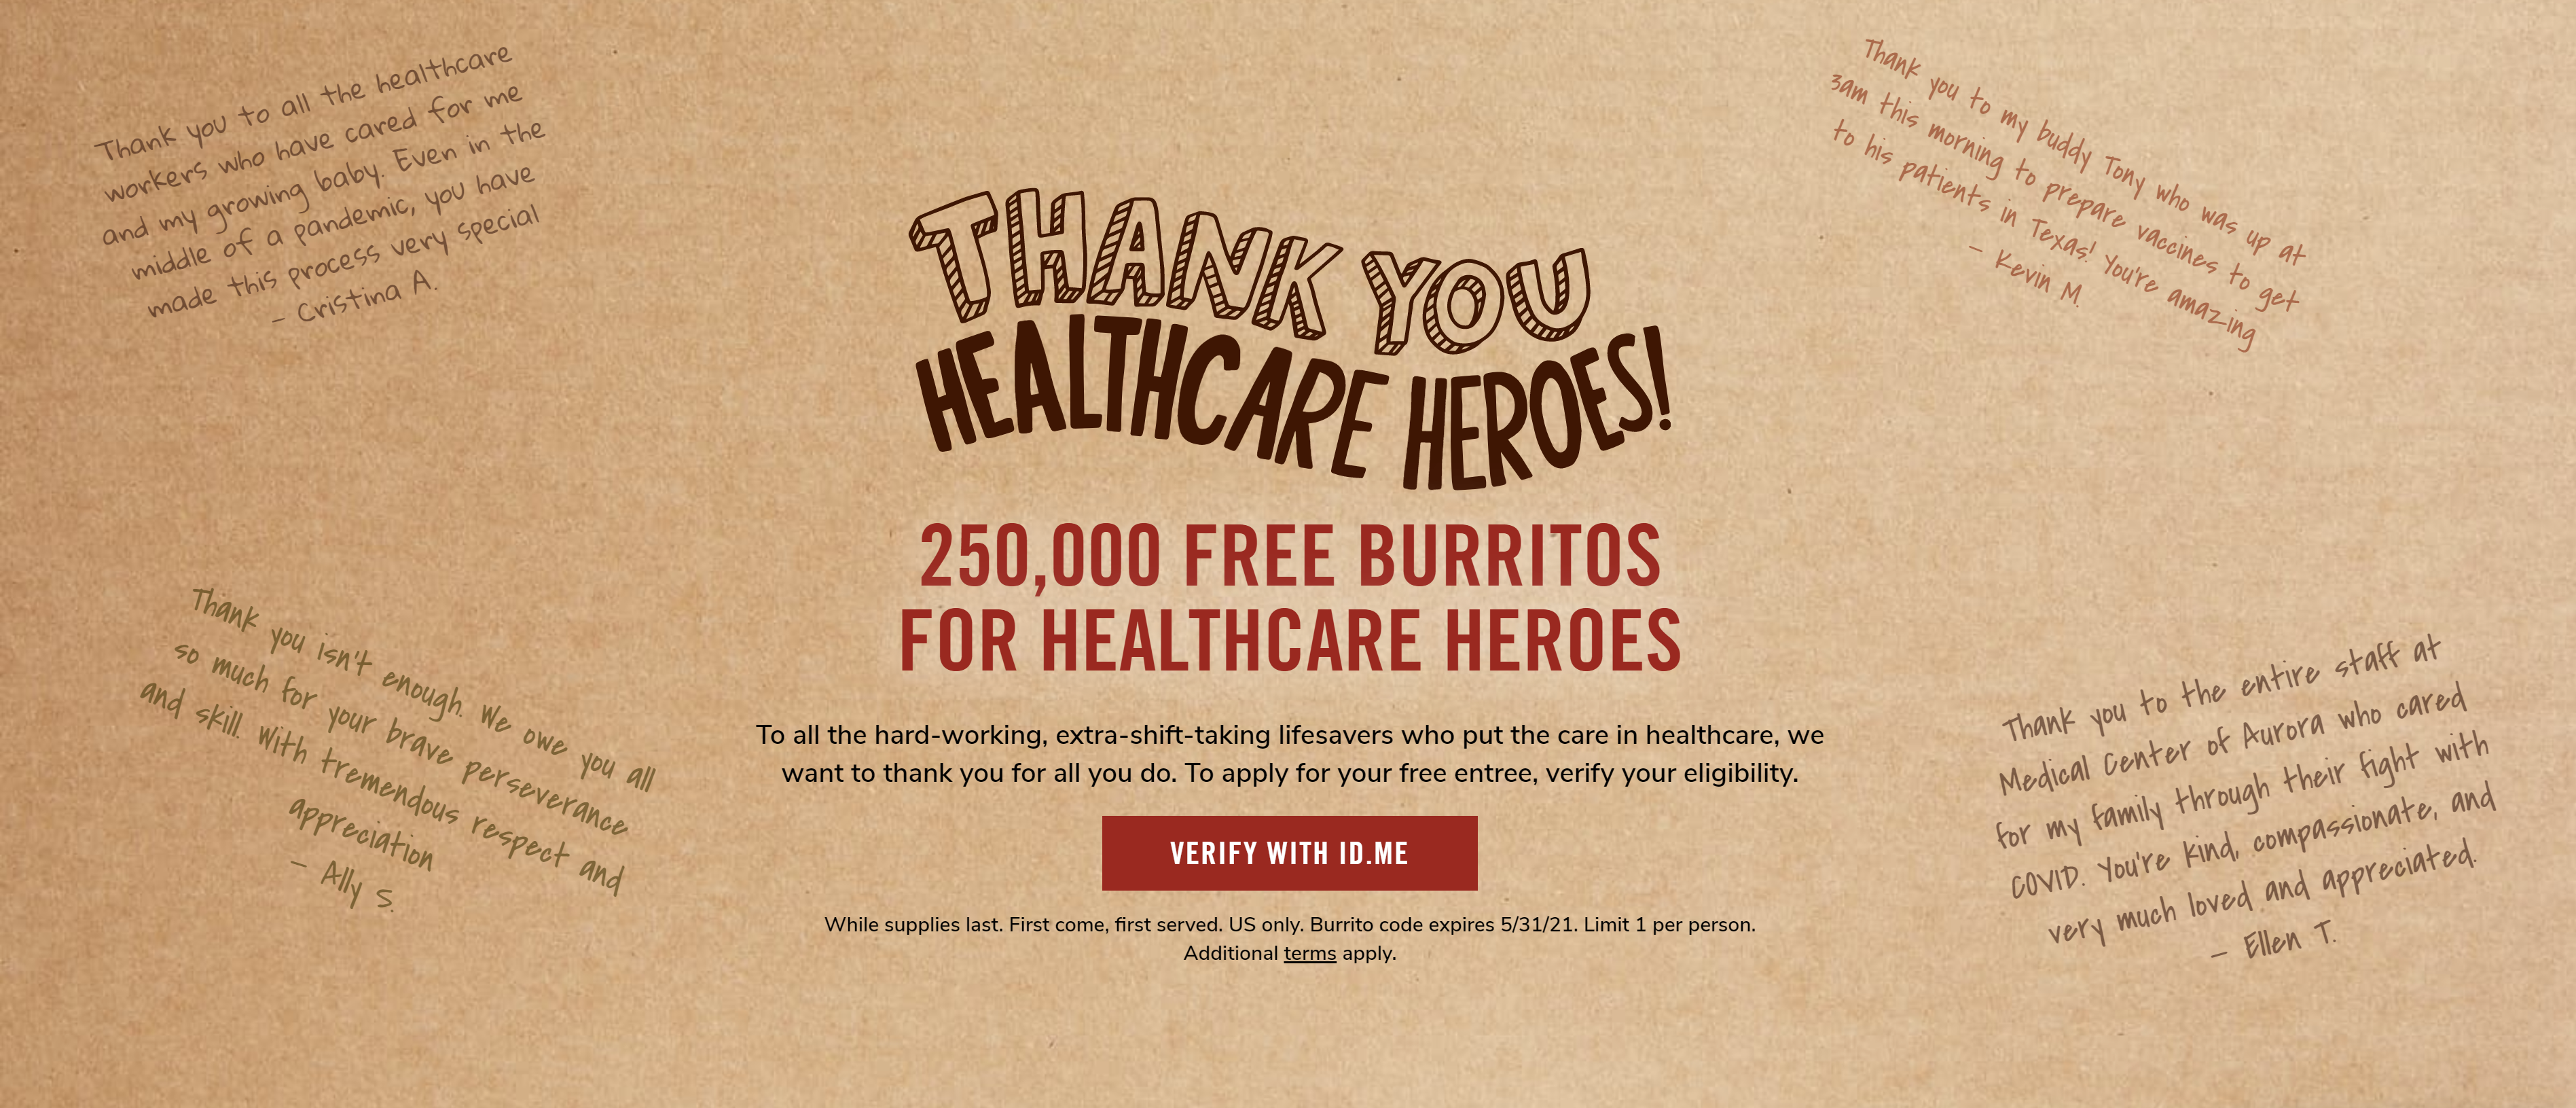 250,000 Free Burritos for Healthcare Heroes